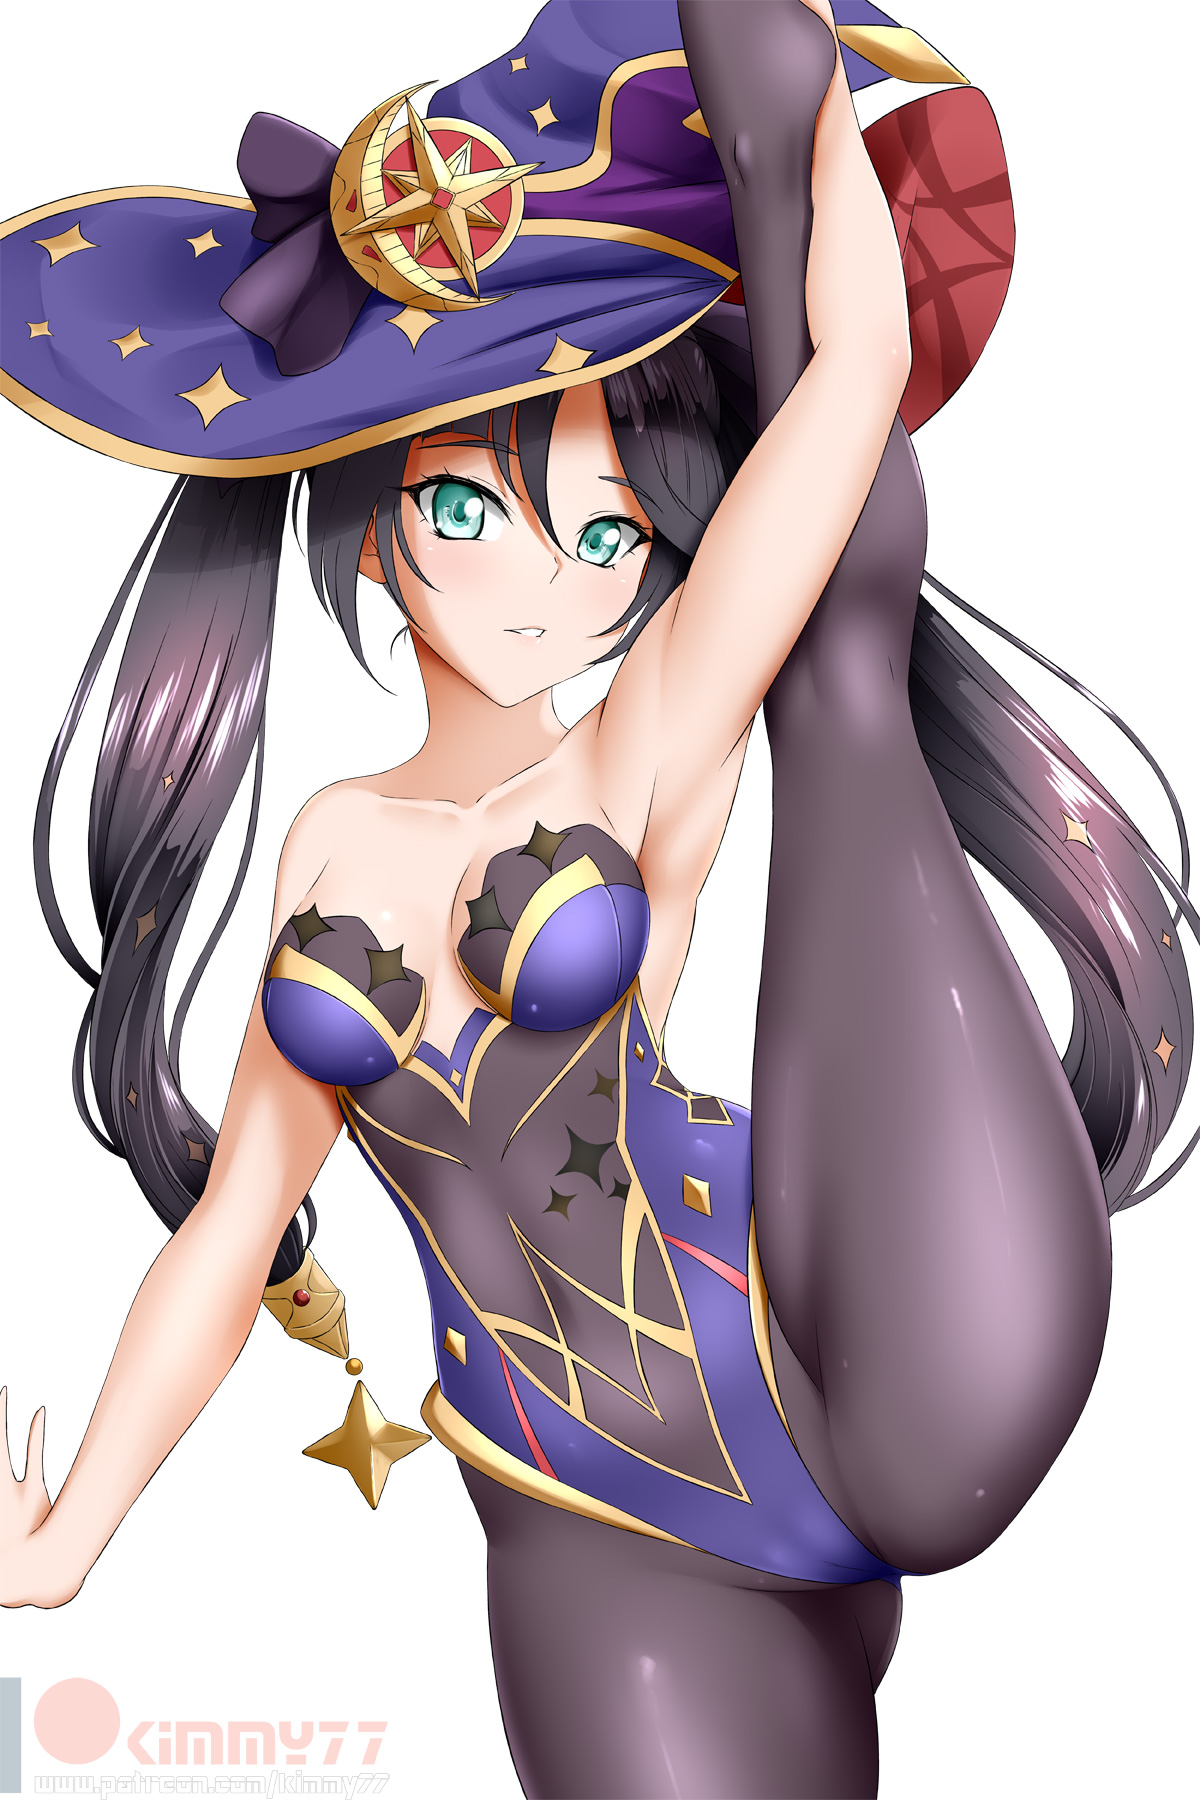 Anime 1200x1800 Genshin Impact video games anime anime girls video game art video game characters magician witch witch hat pantyhose bodysuit Mona (Genshin Impact) blue hair dark hair low neckline spread legs long hair hat Kimmy77 splits standing cameltoe